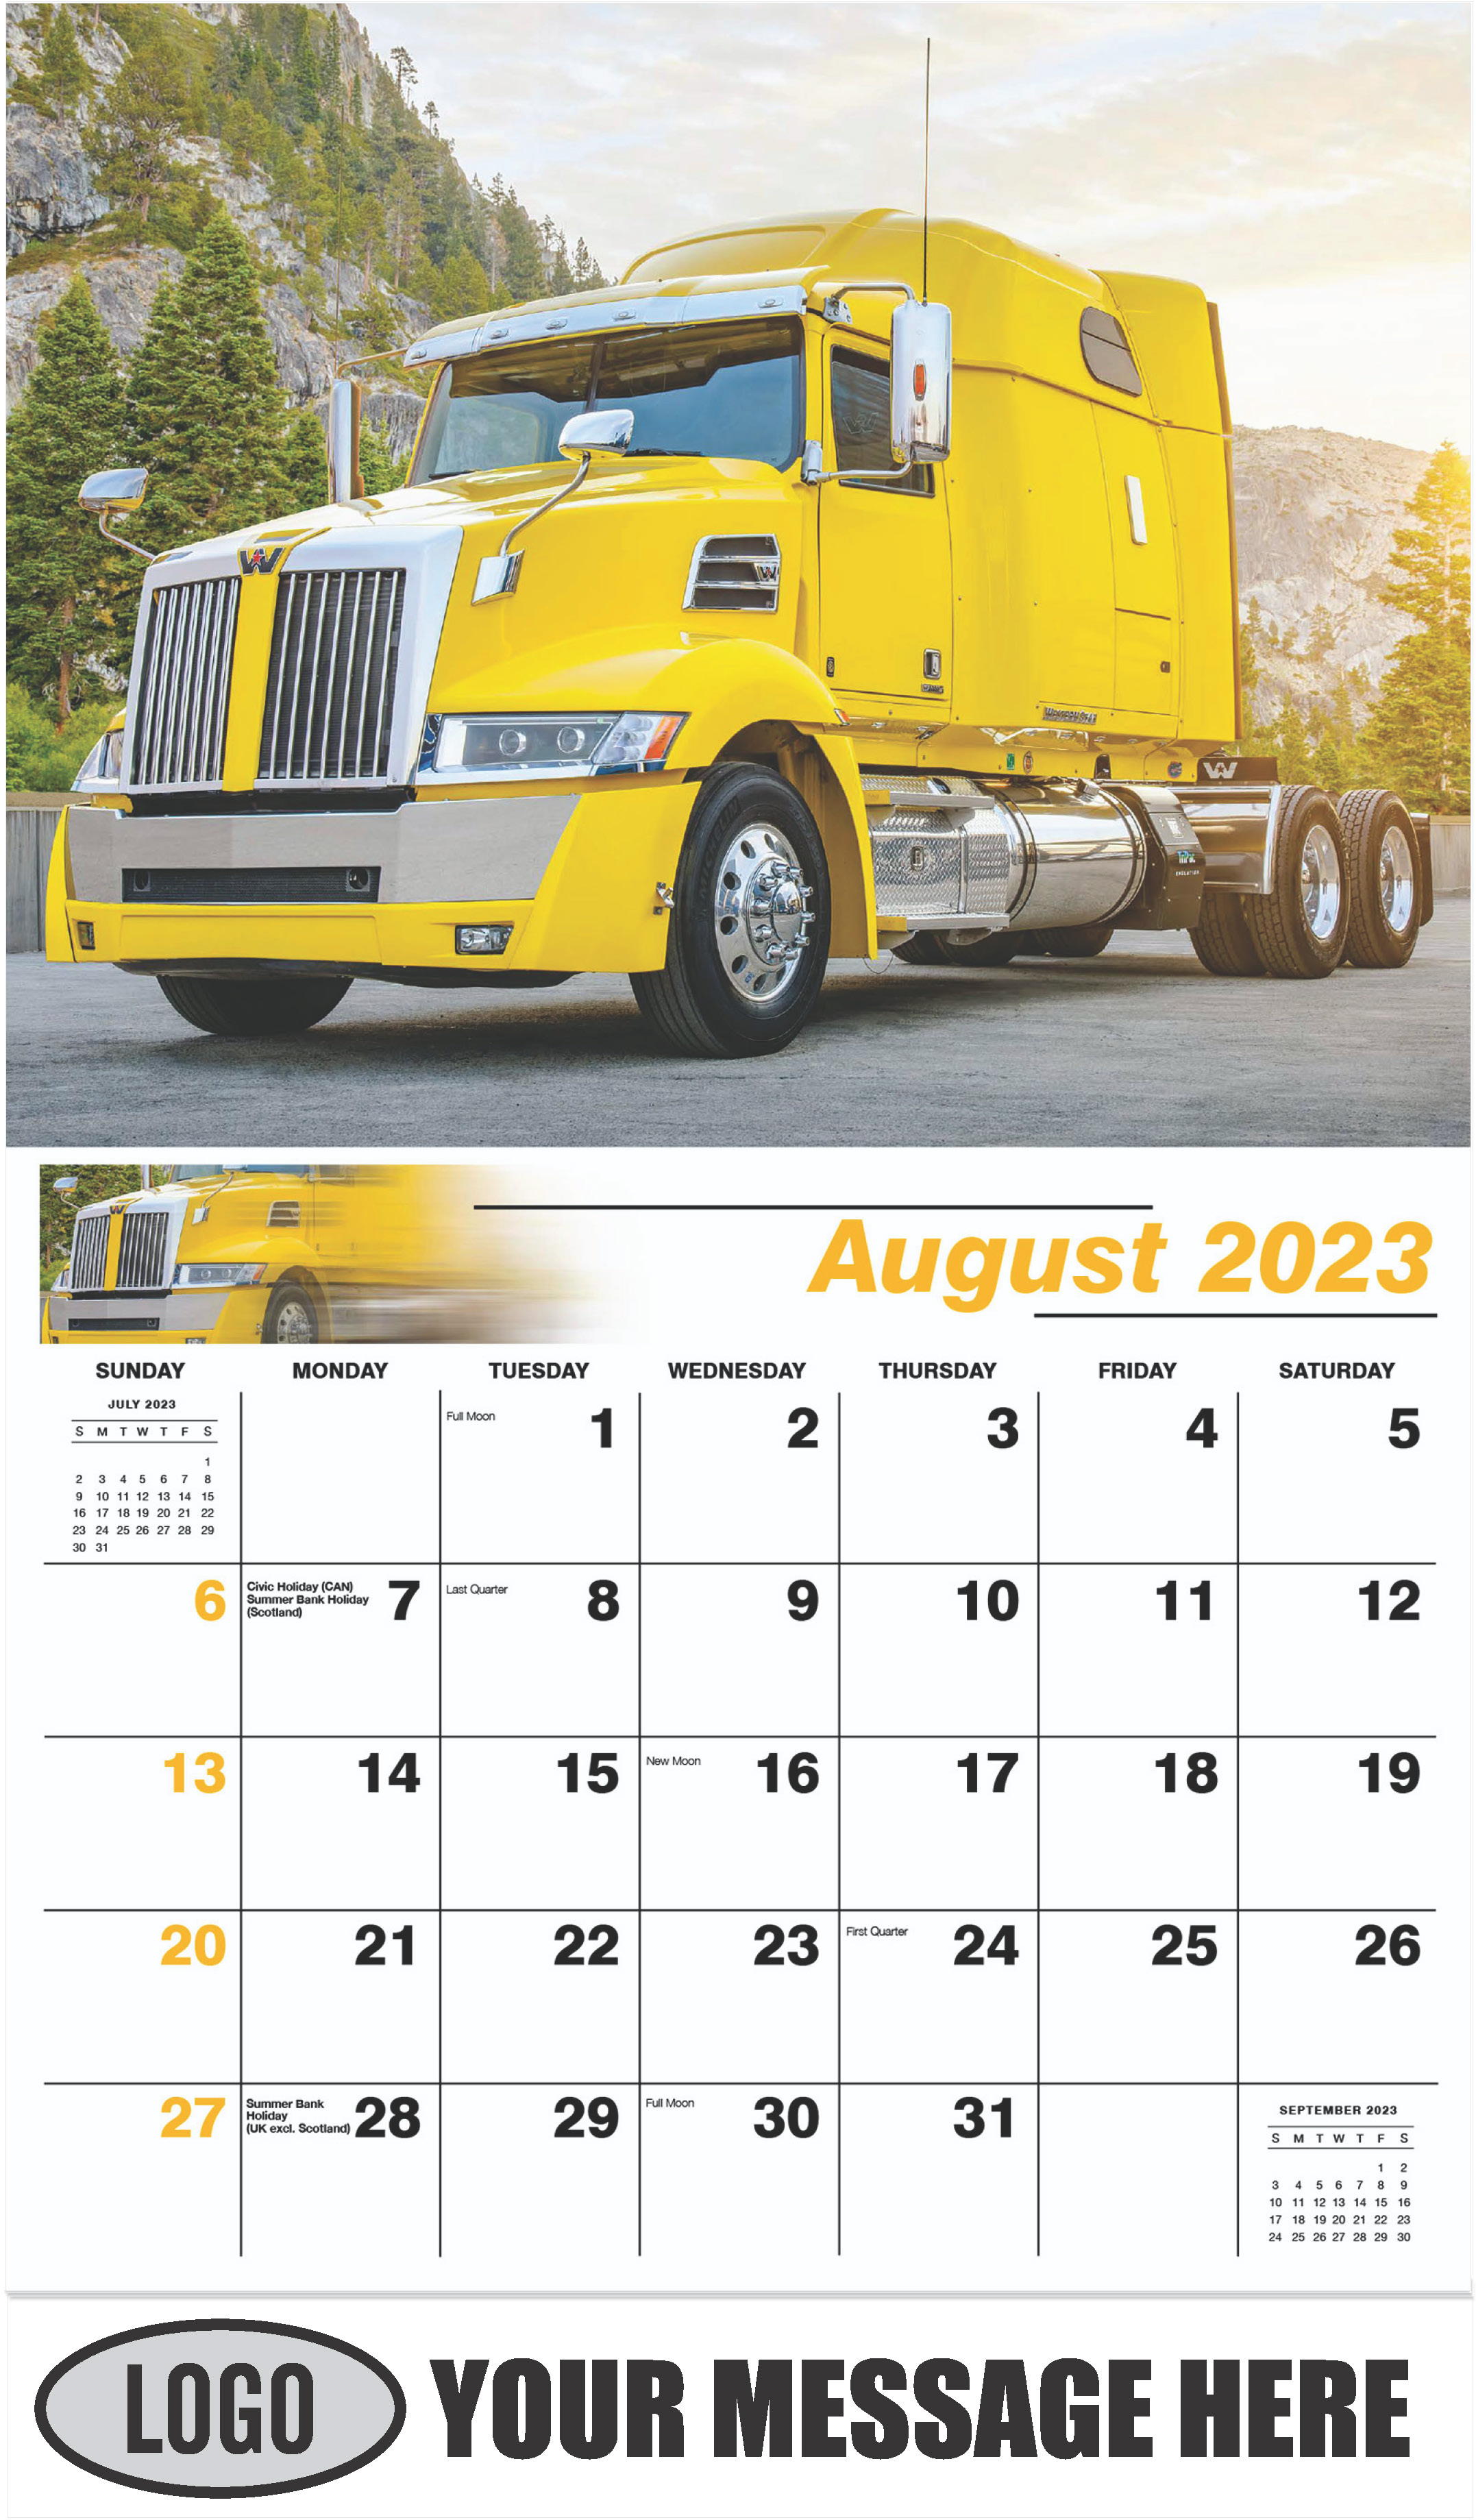 2016 Western Star 5700XE - August - Kings of the Road 2023 Promotional Calendar